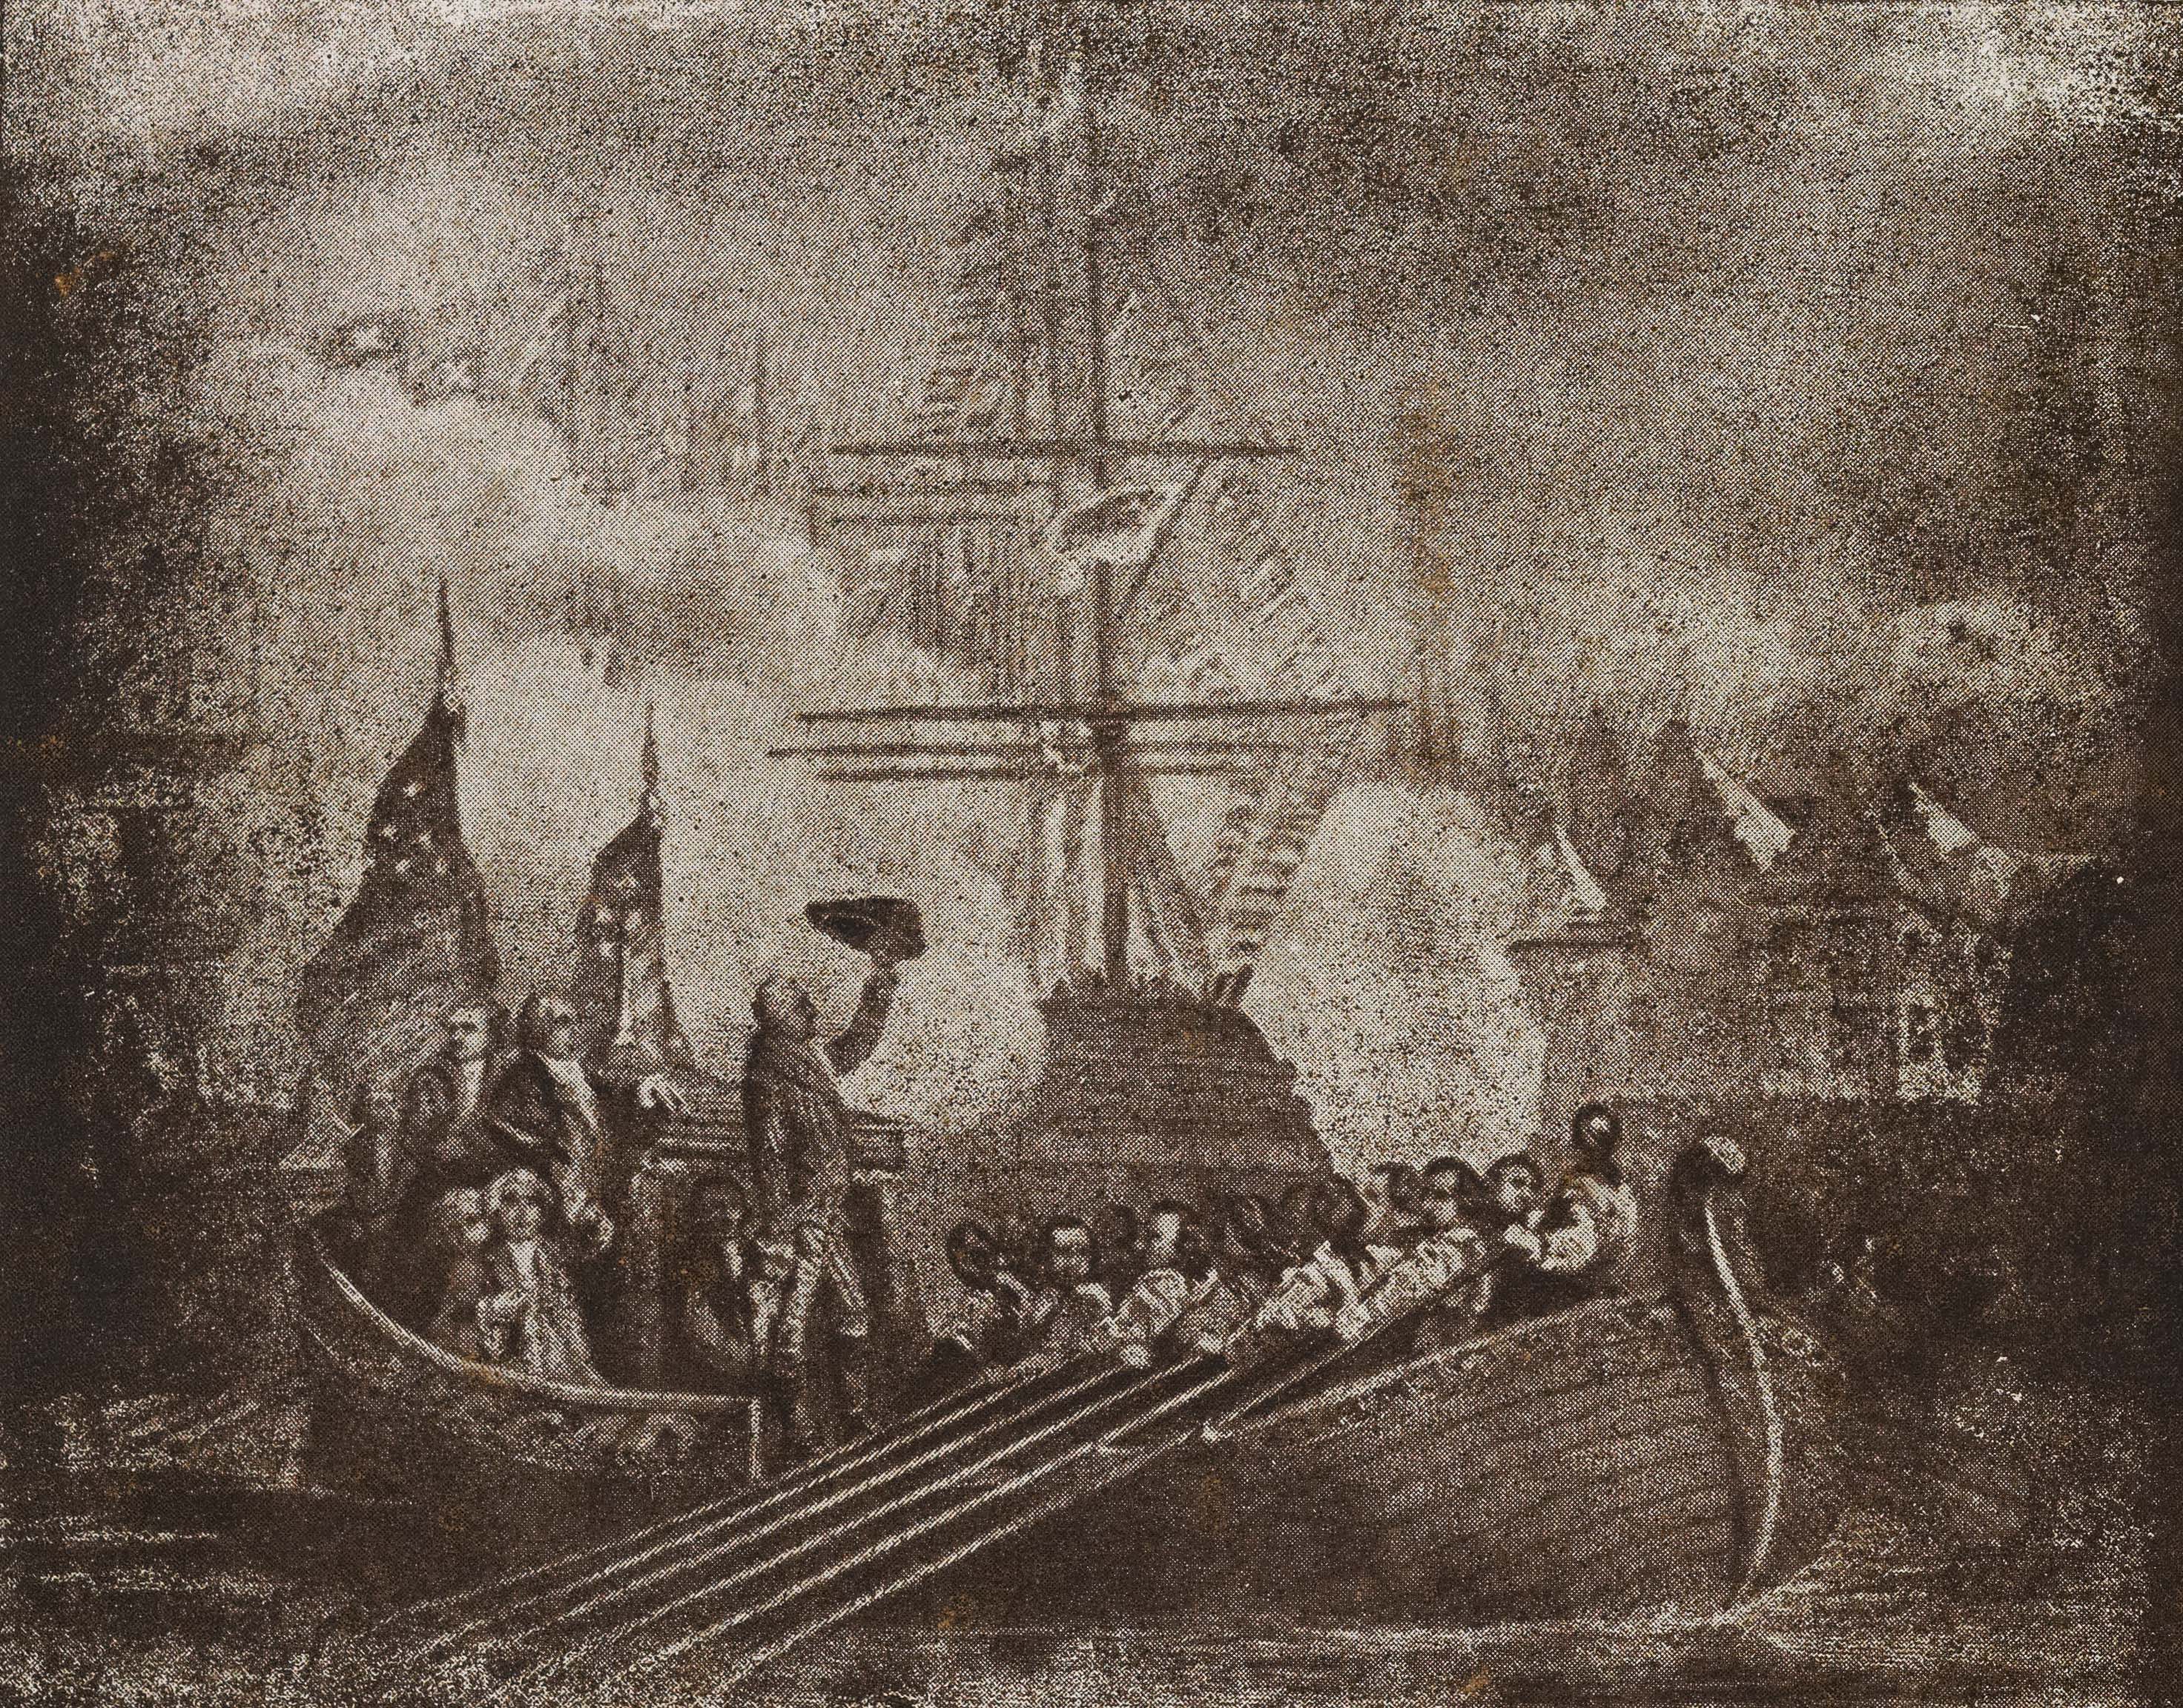 George Washington's arrival to New York for his presidential inauguration